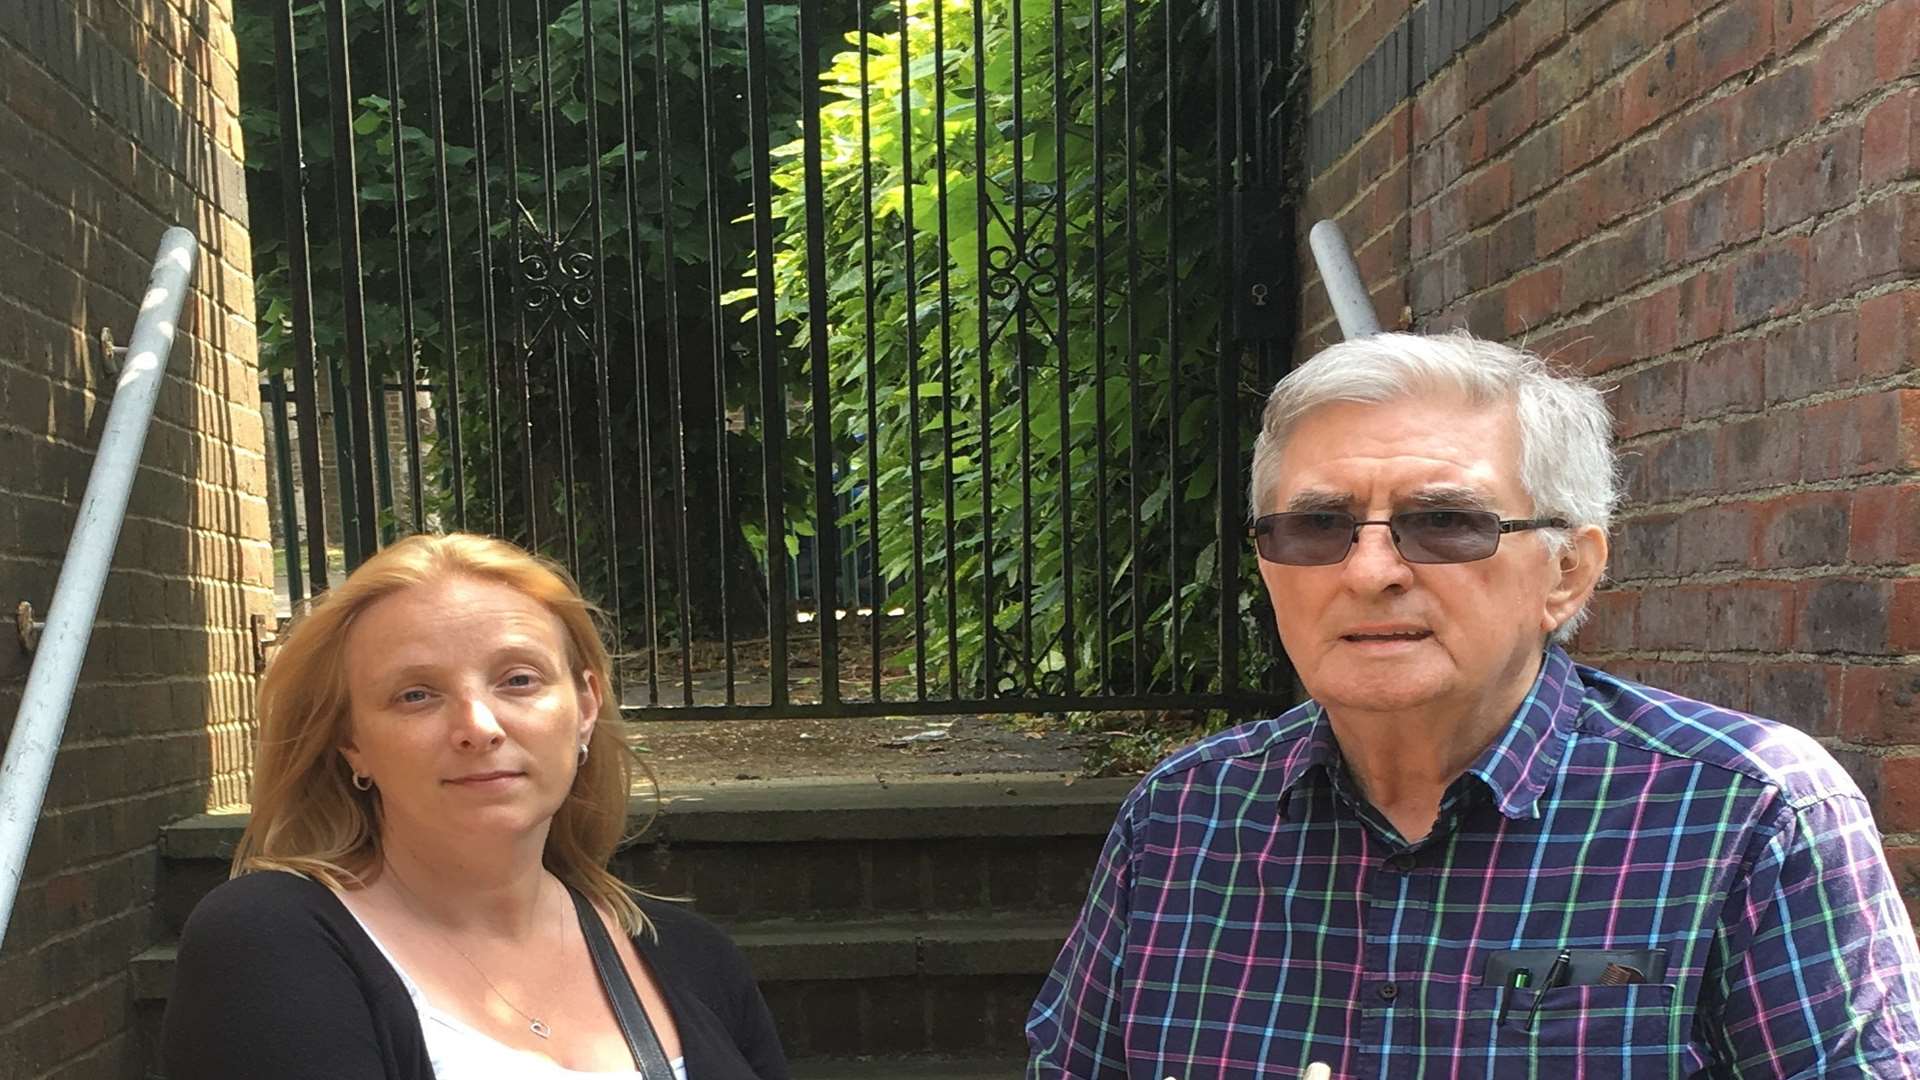 Cllr Ann Napier with St Monica's resident Keith Langsford.